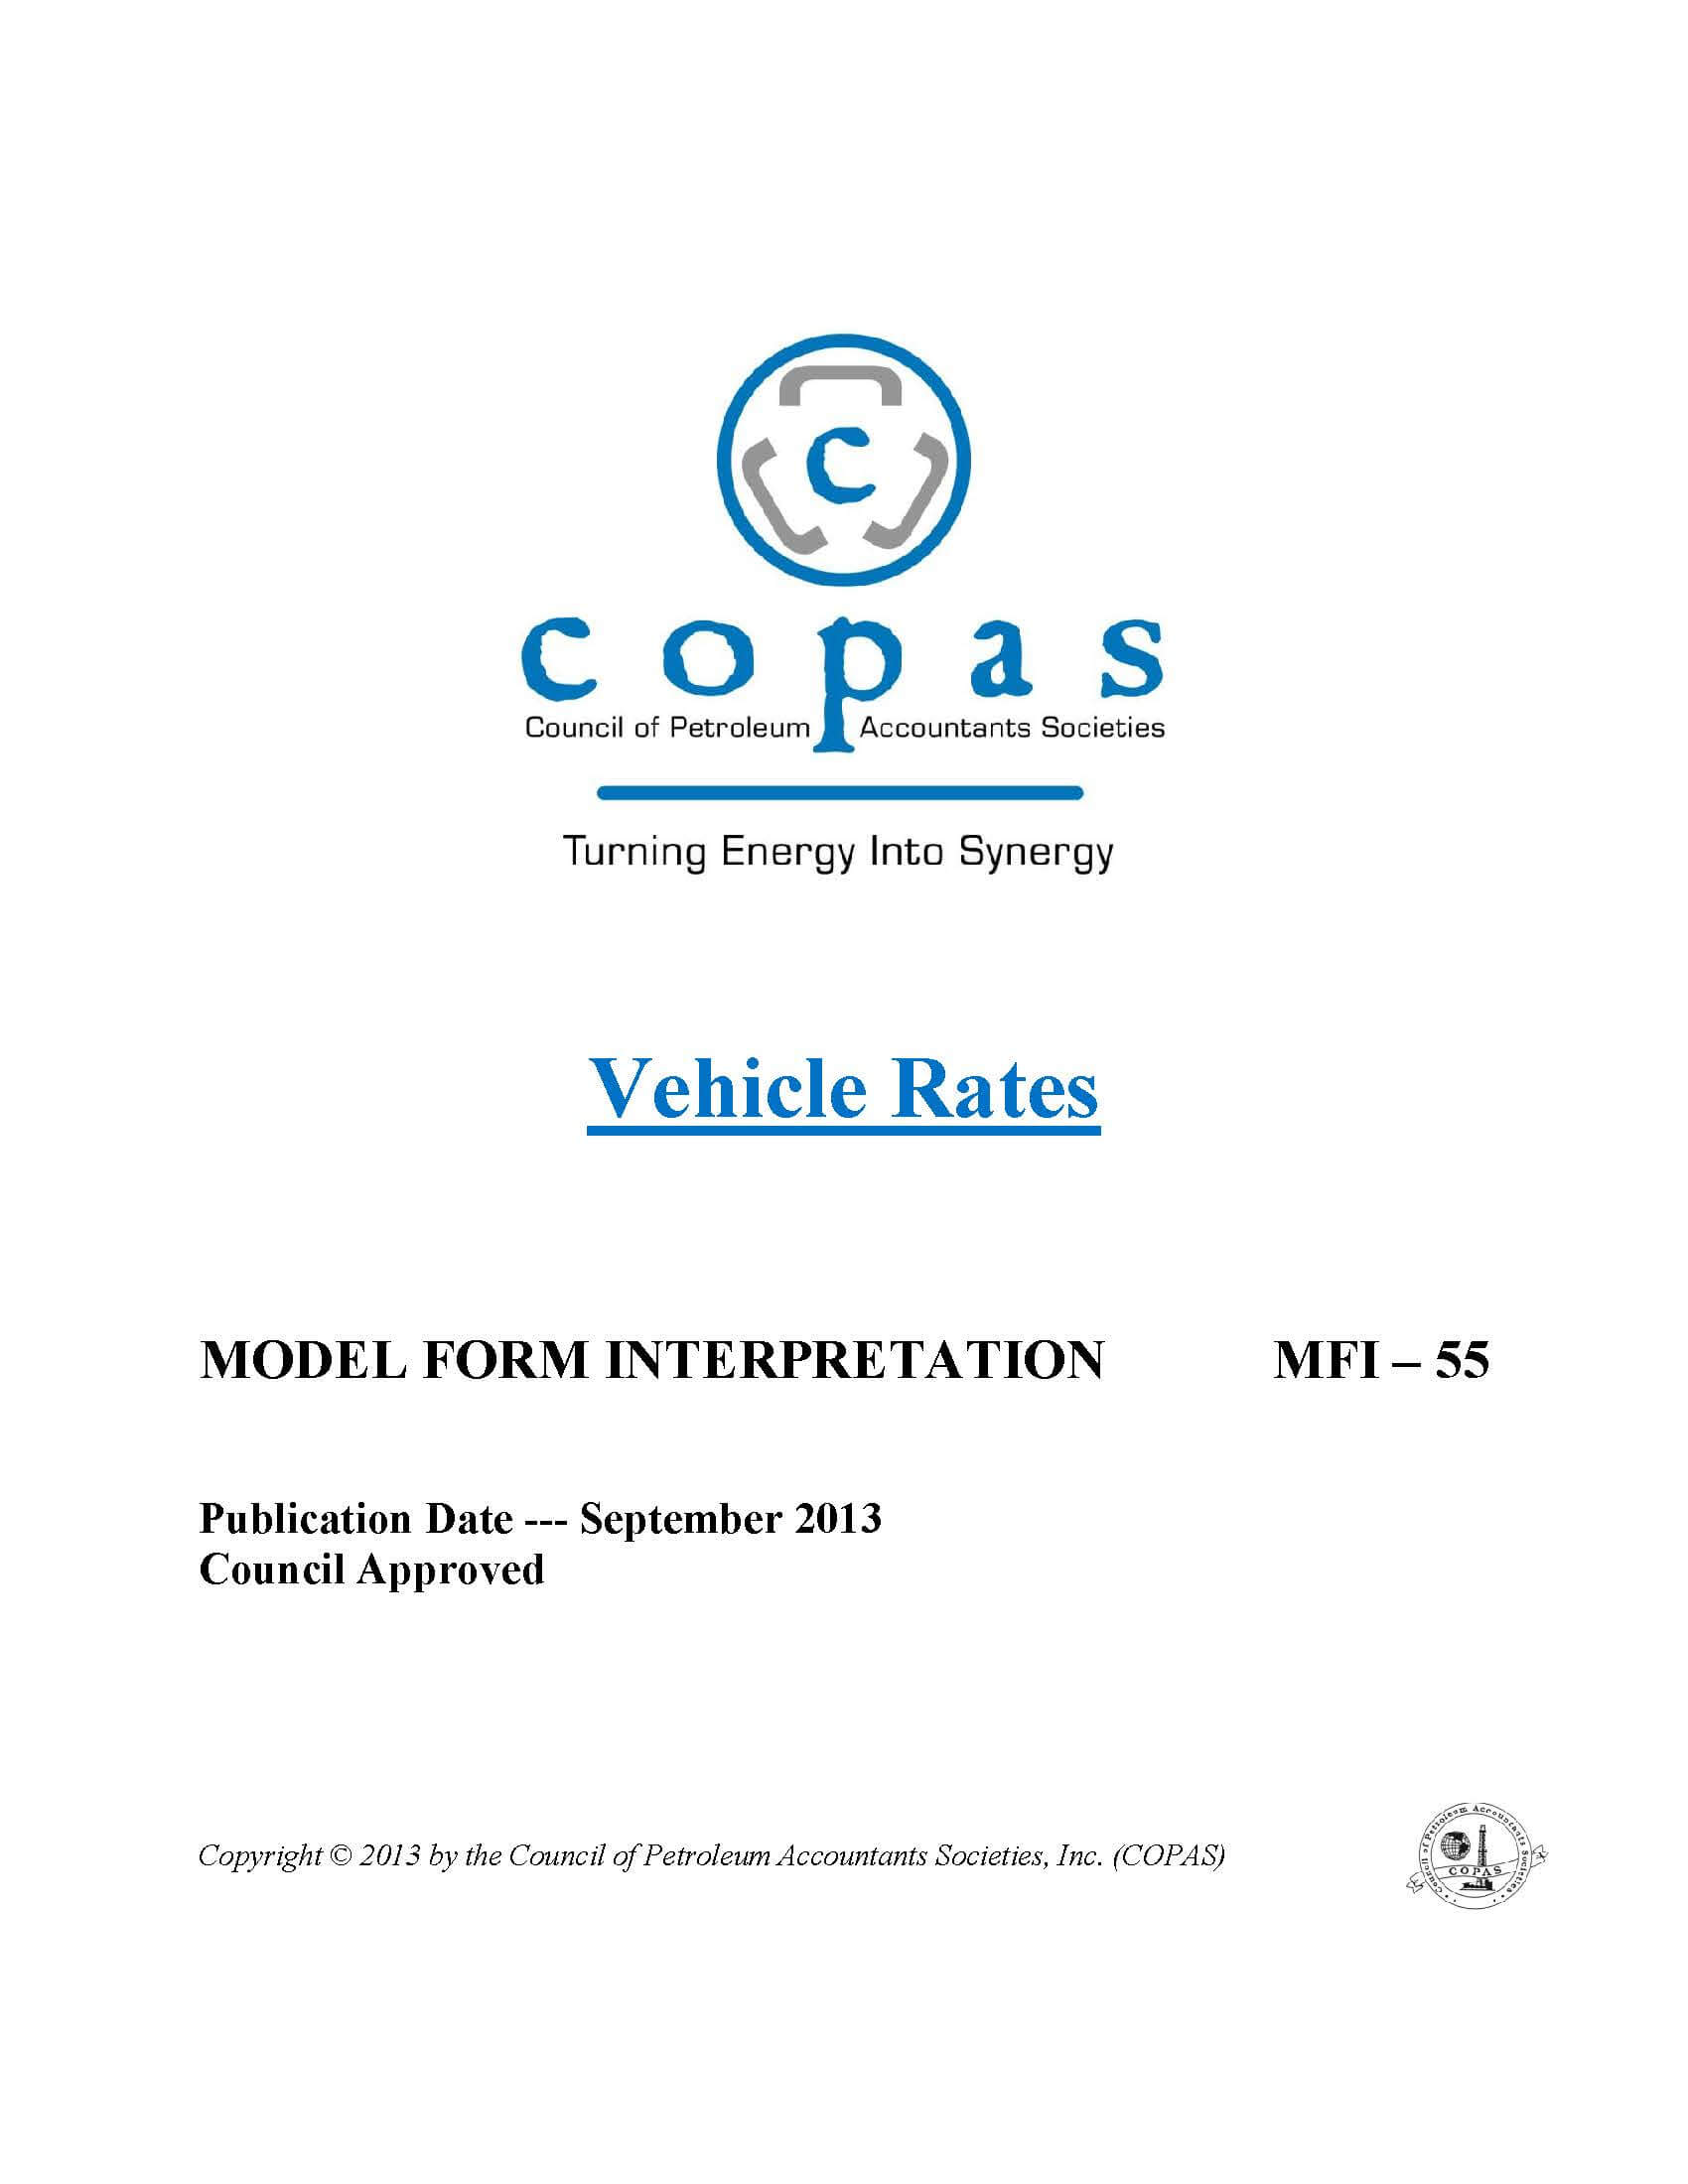 MFI-55 Vehicle Rates - products MFI 55 Vehicle Rates - Council of Petroleum Accountants Societies